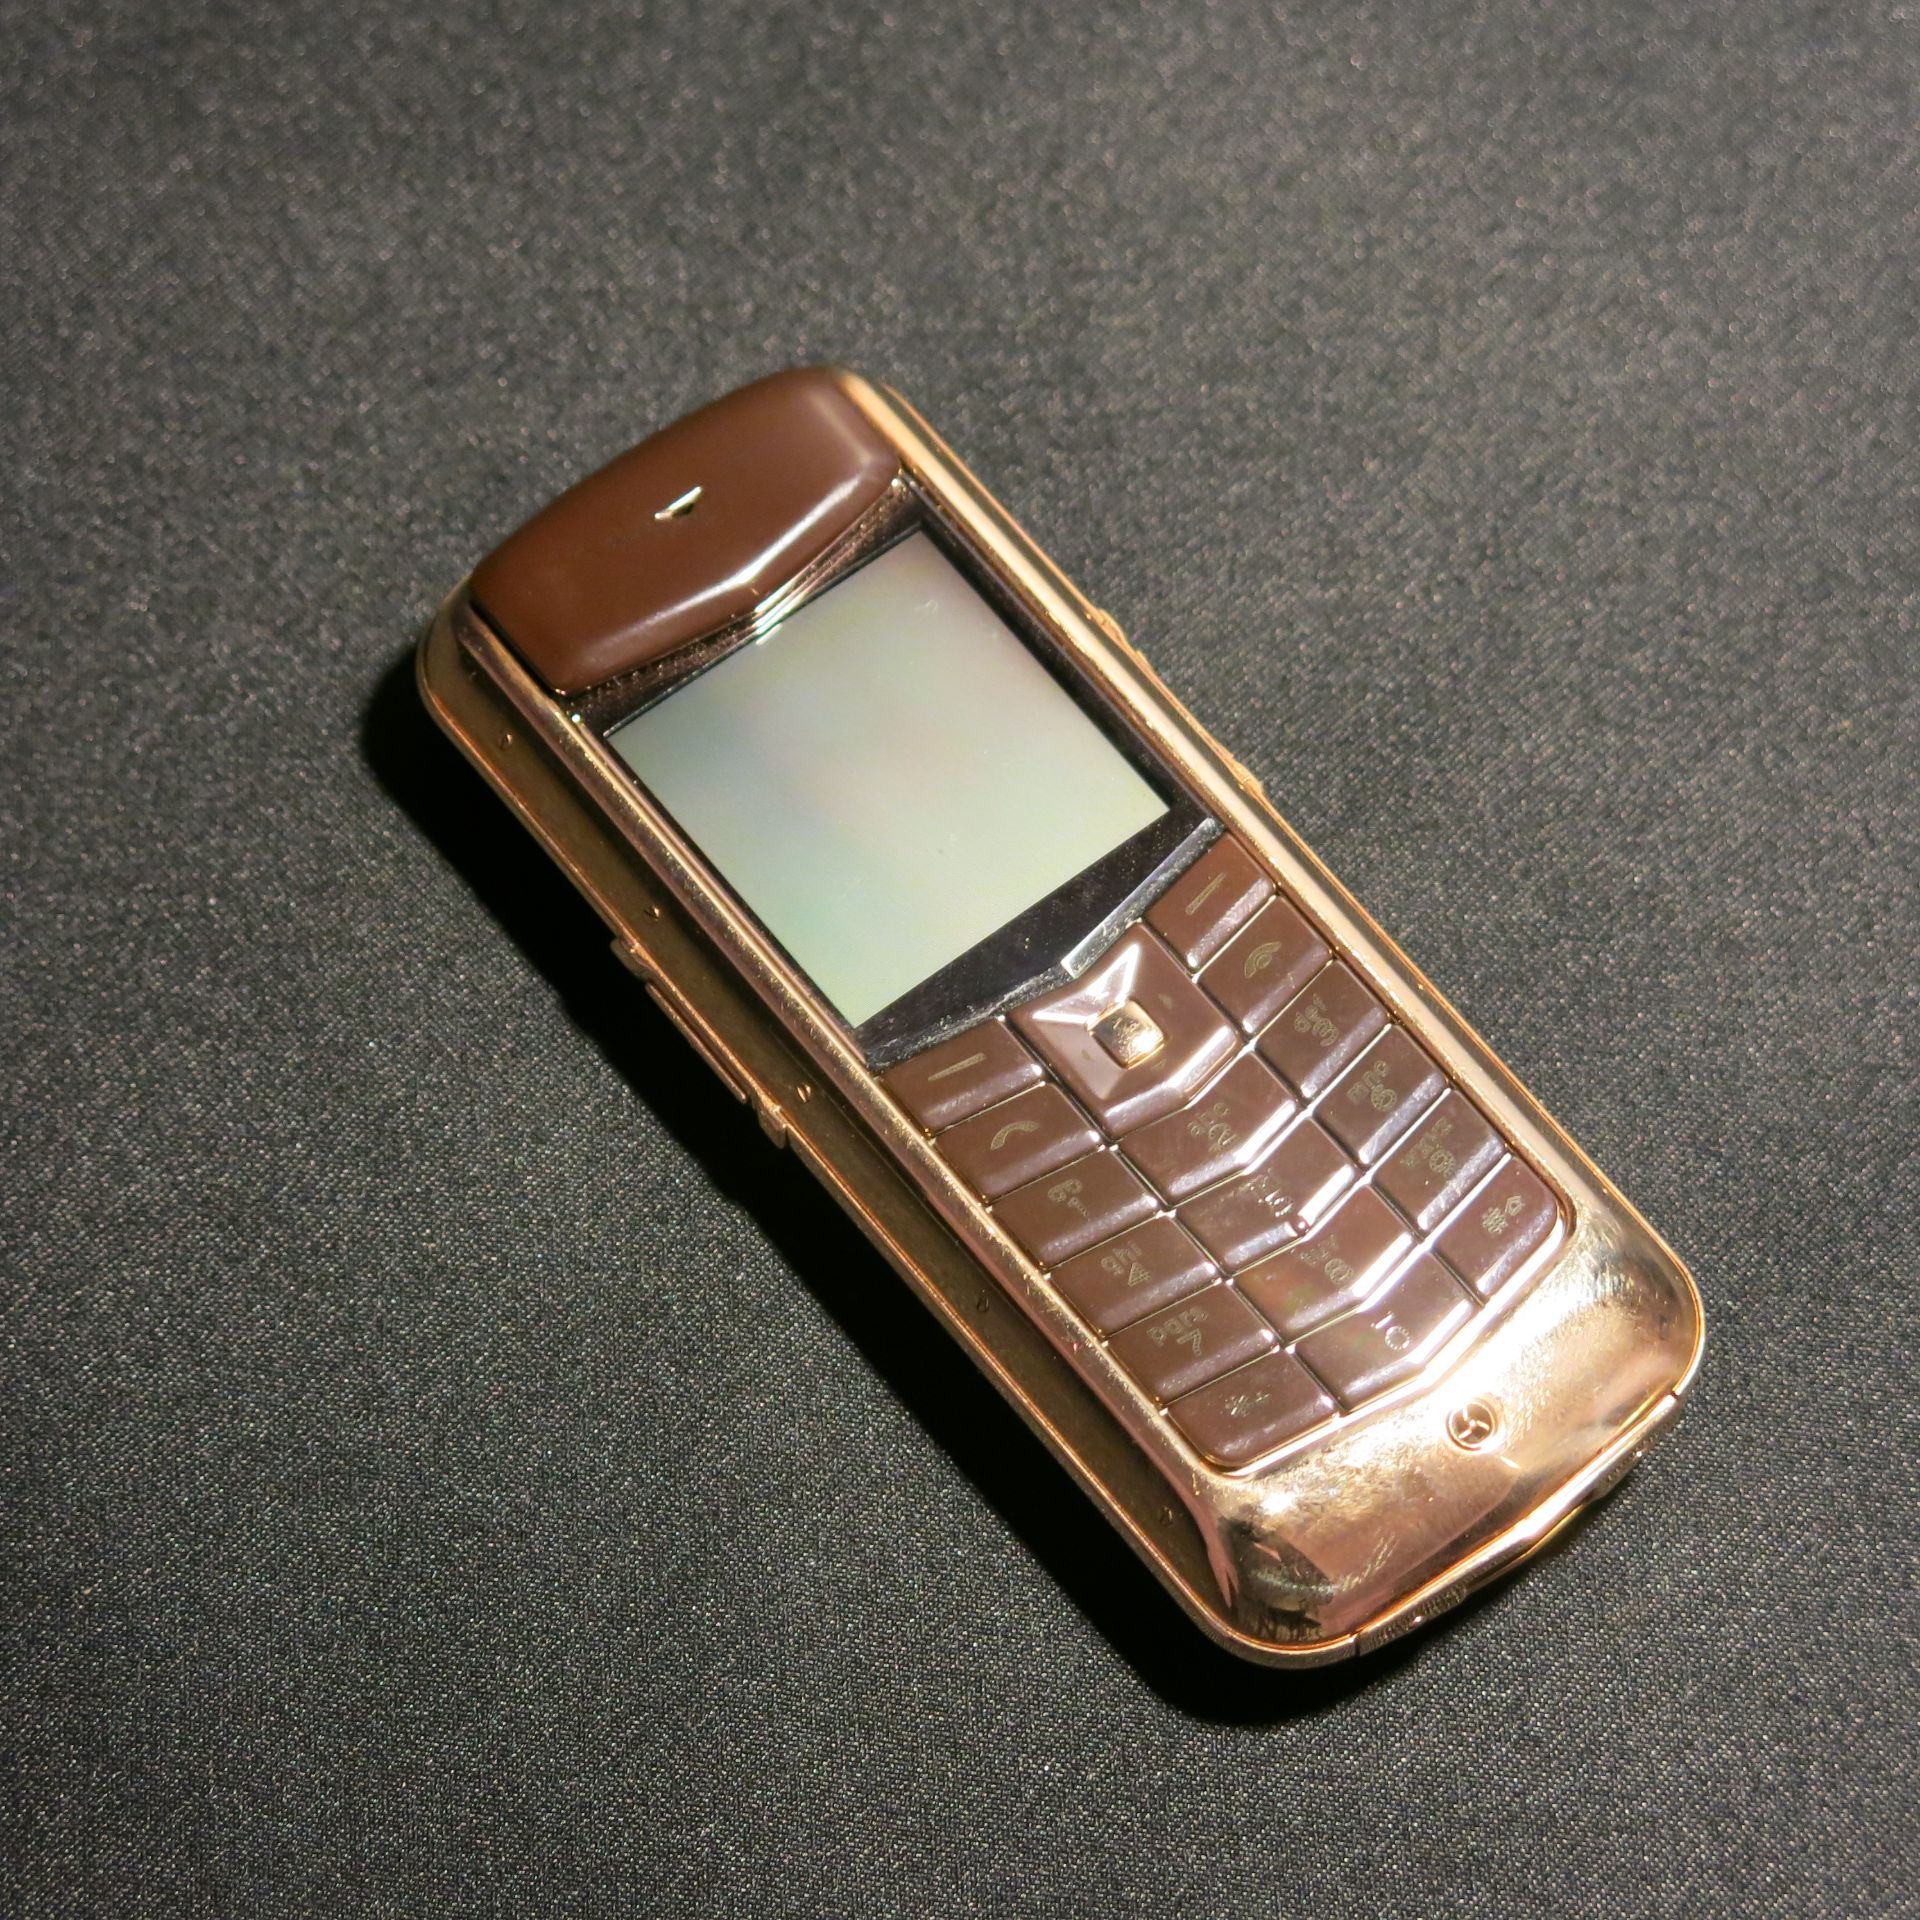 Entire Contents of the VERTU Museum Collection to Include: 105 Various Iconic Phones & Appearance - Image 77 of 106